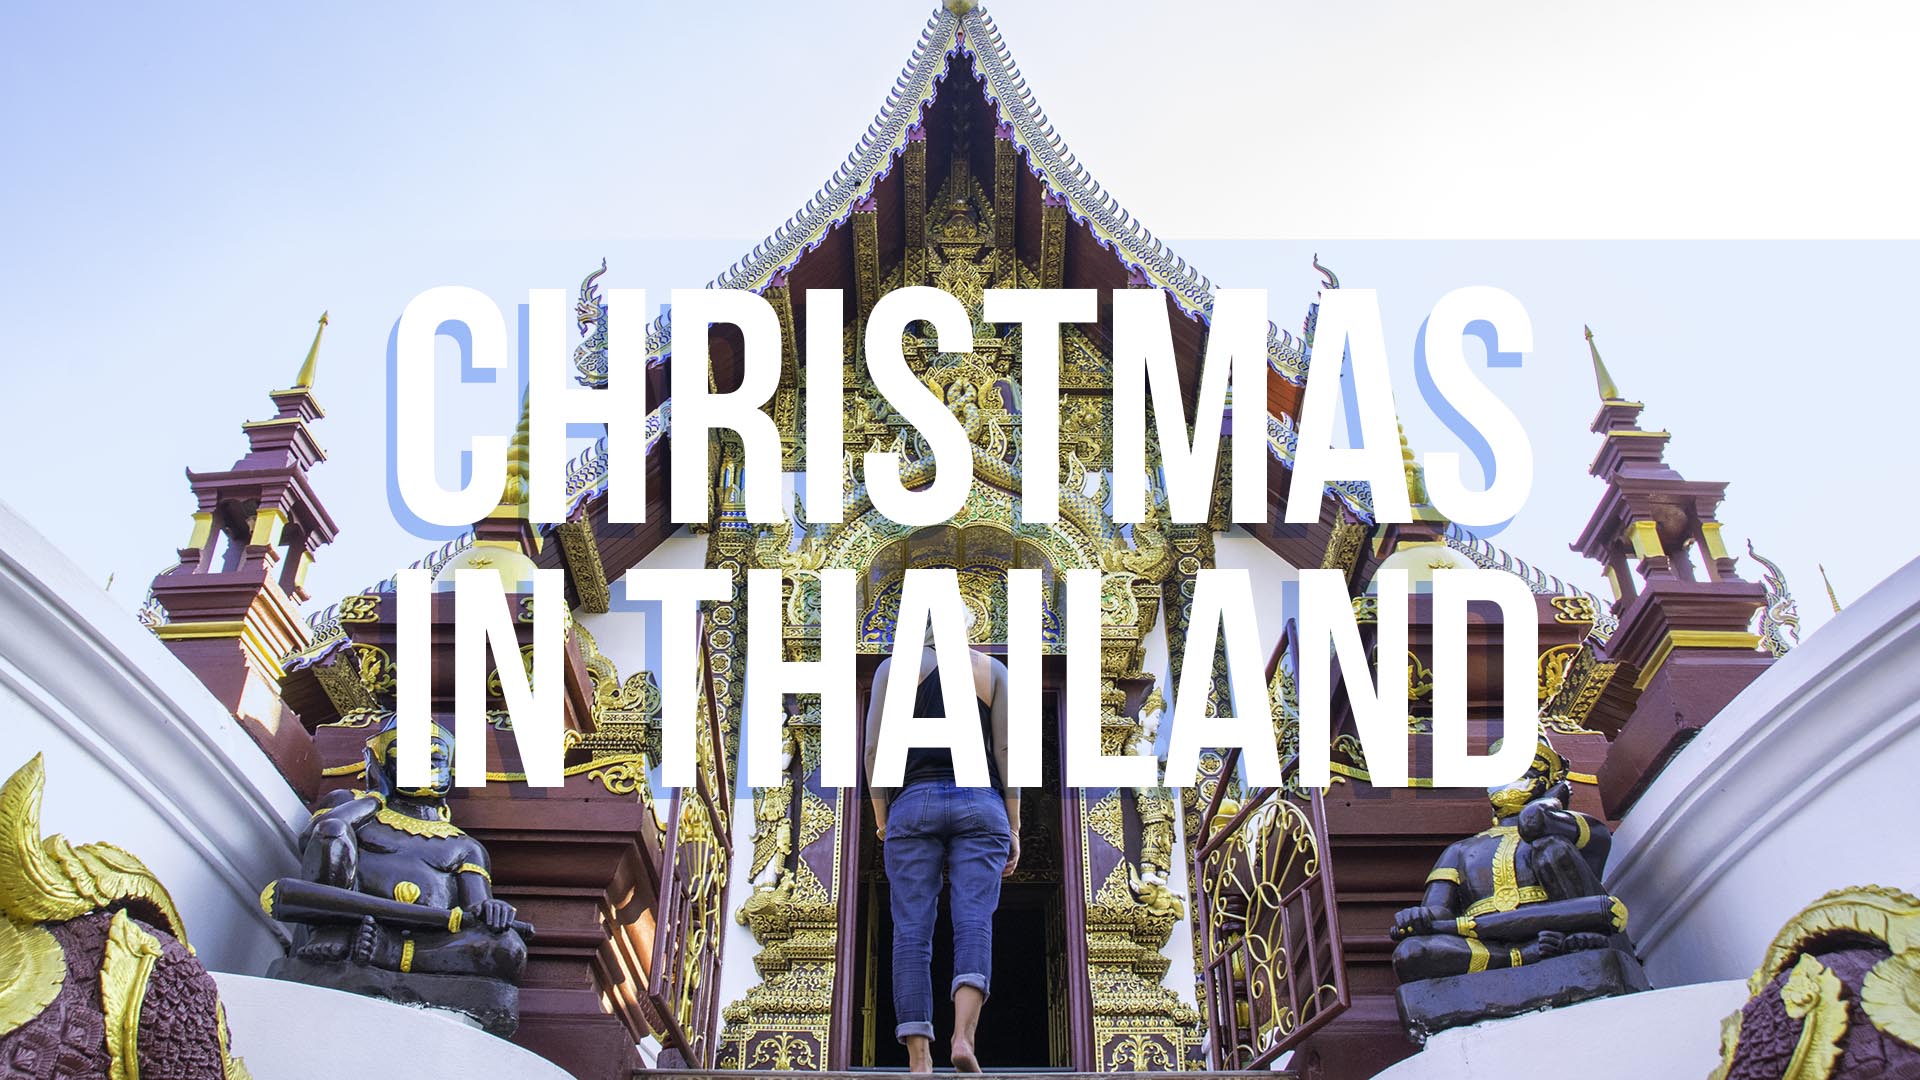 Christmas in Chiang Mai Thailand